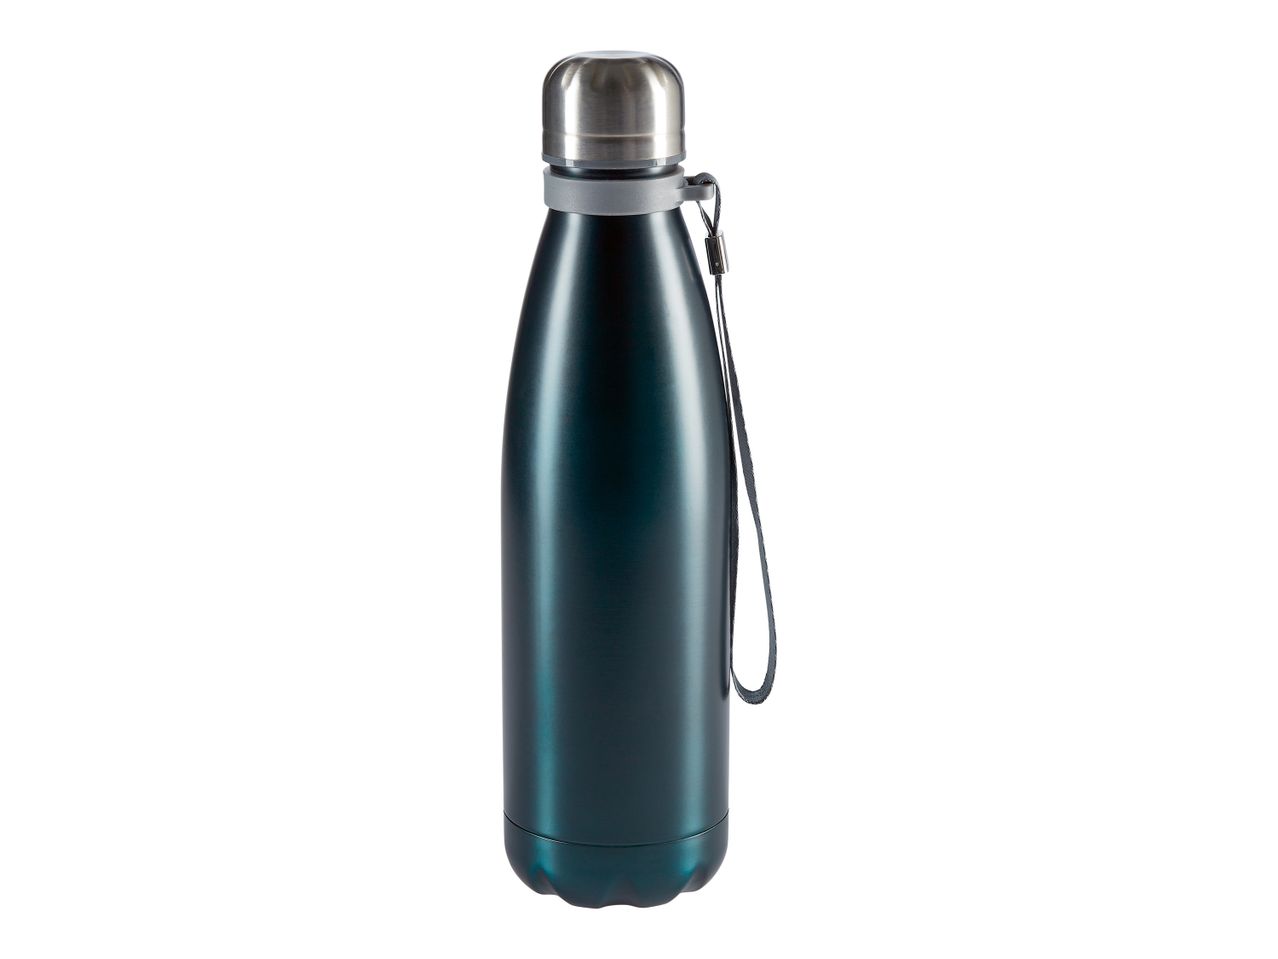 Go to full screen view: Stainless Steel Insulated Flask or Travel Mug - Image 1